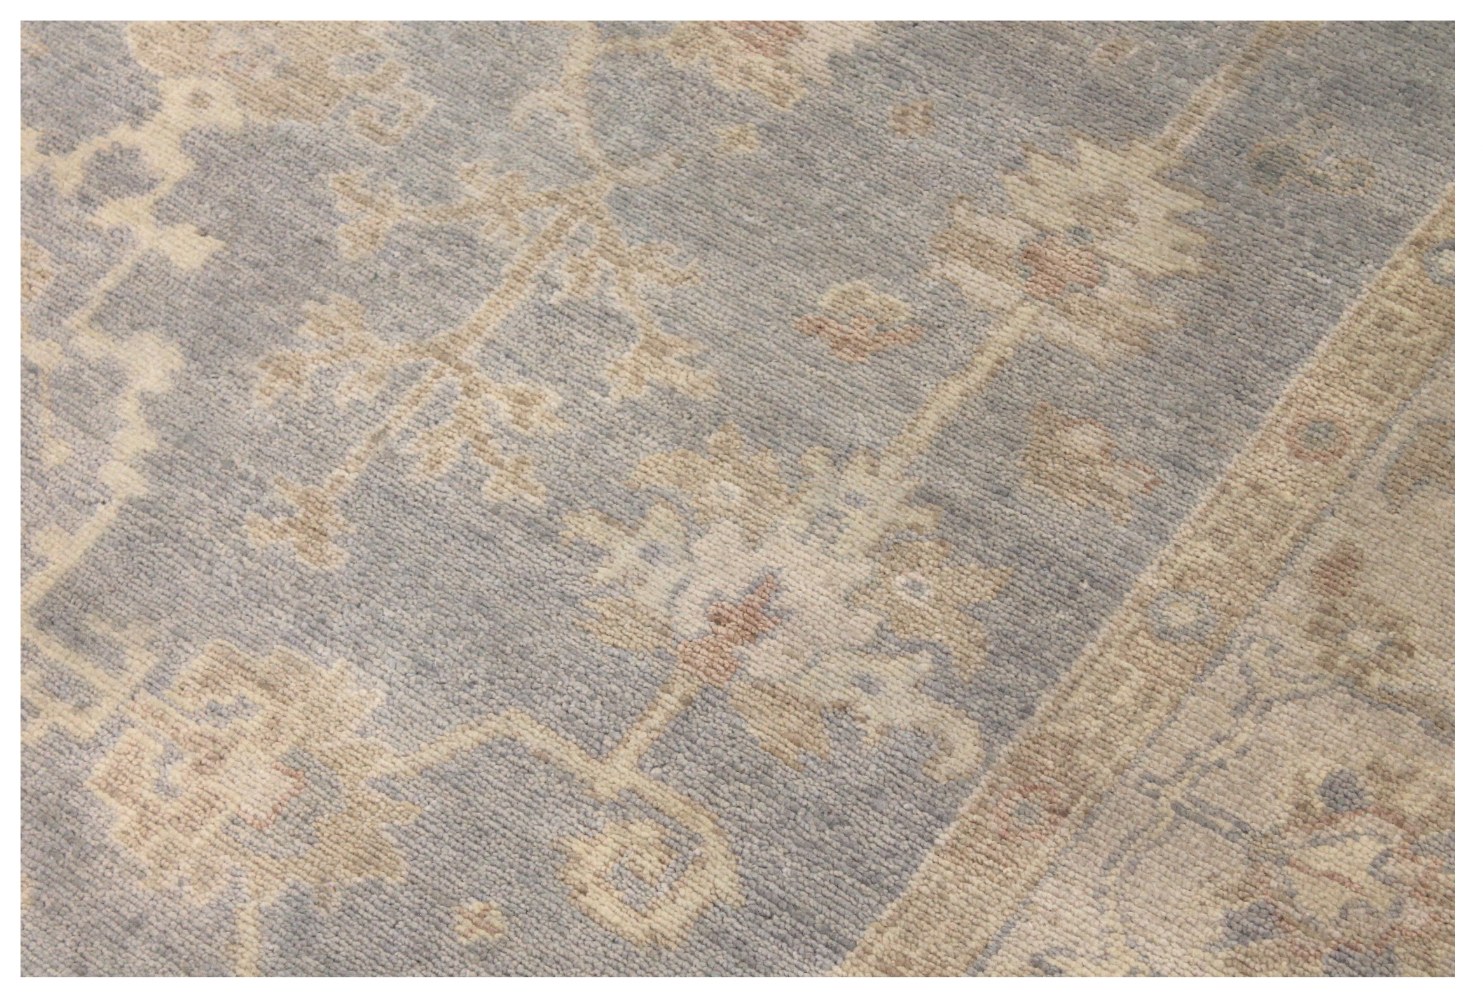 6x9 Oushak Hand Knotted Wool Area Rug - MR028526